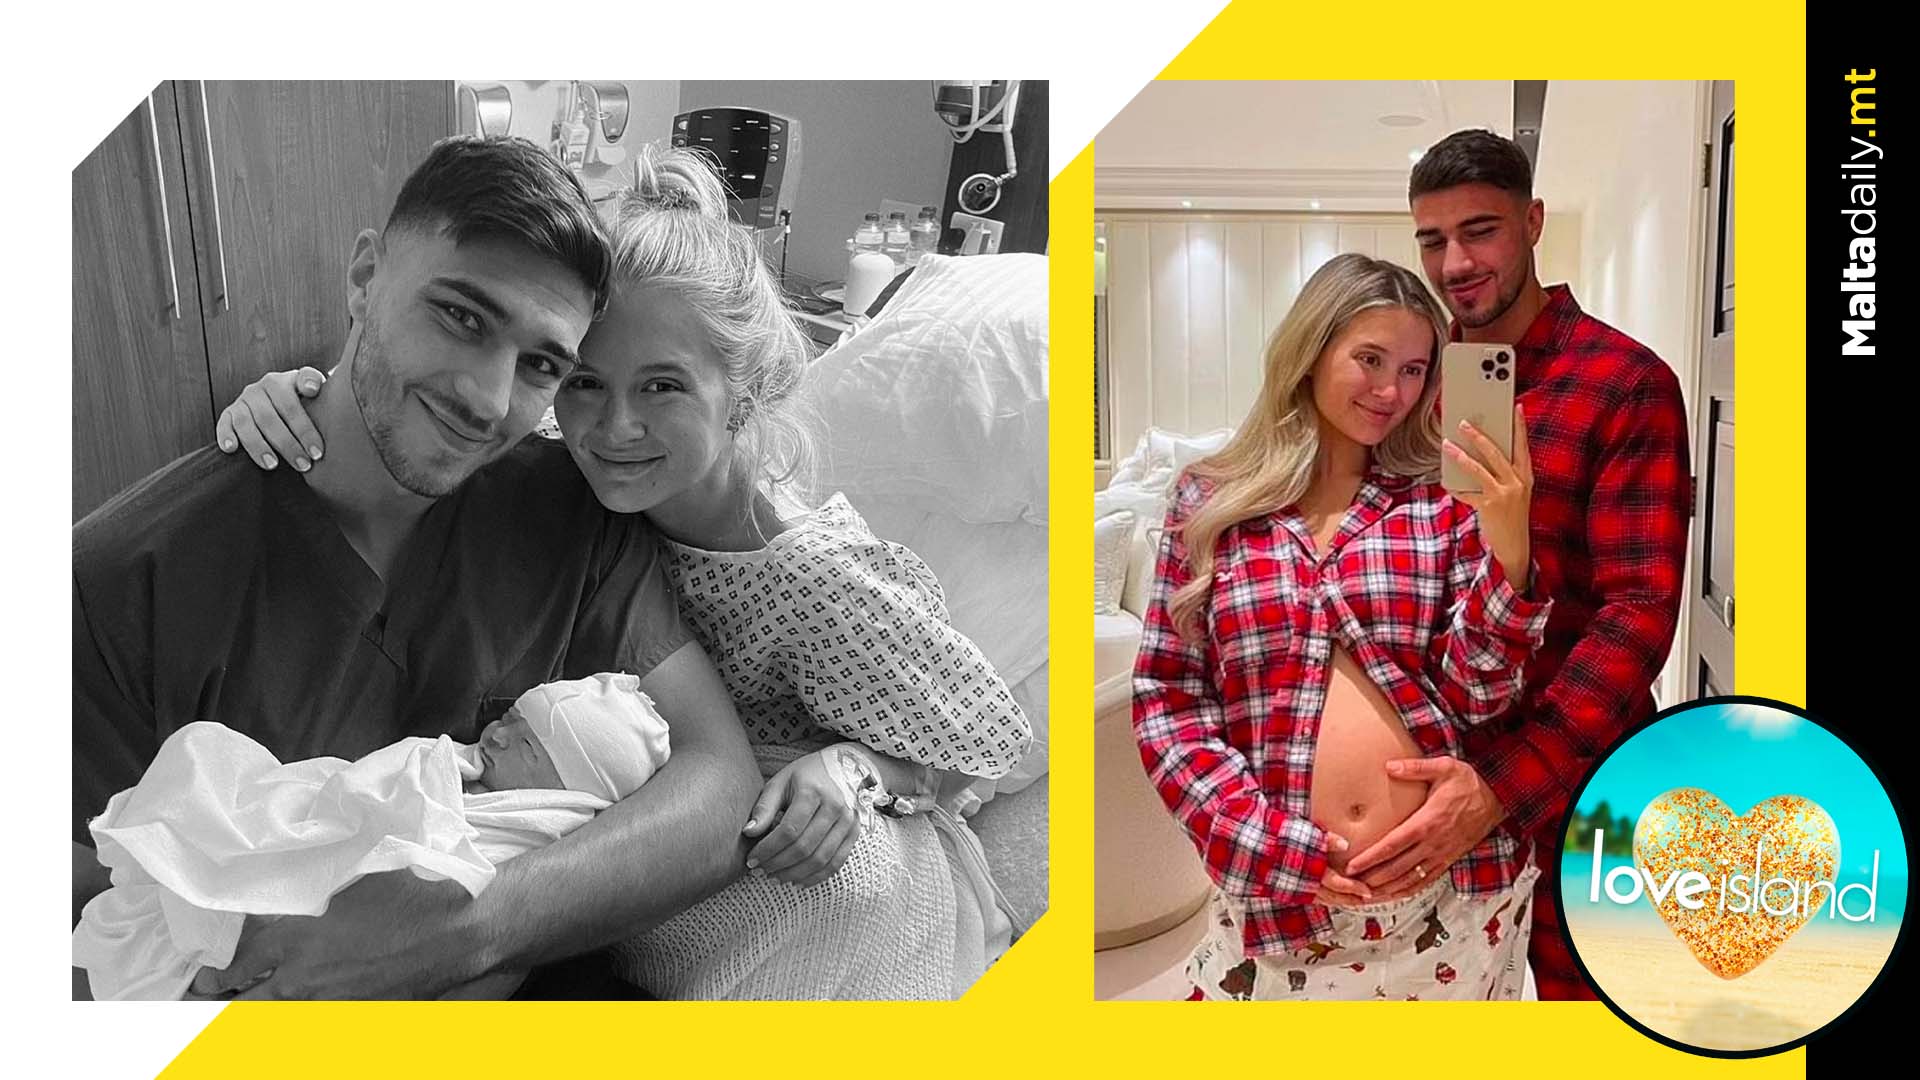 Love Island’s Molly-Mae Hague and Tommy Fury welcome baby girl